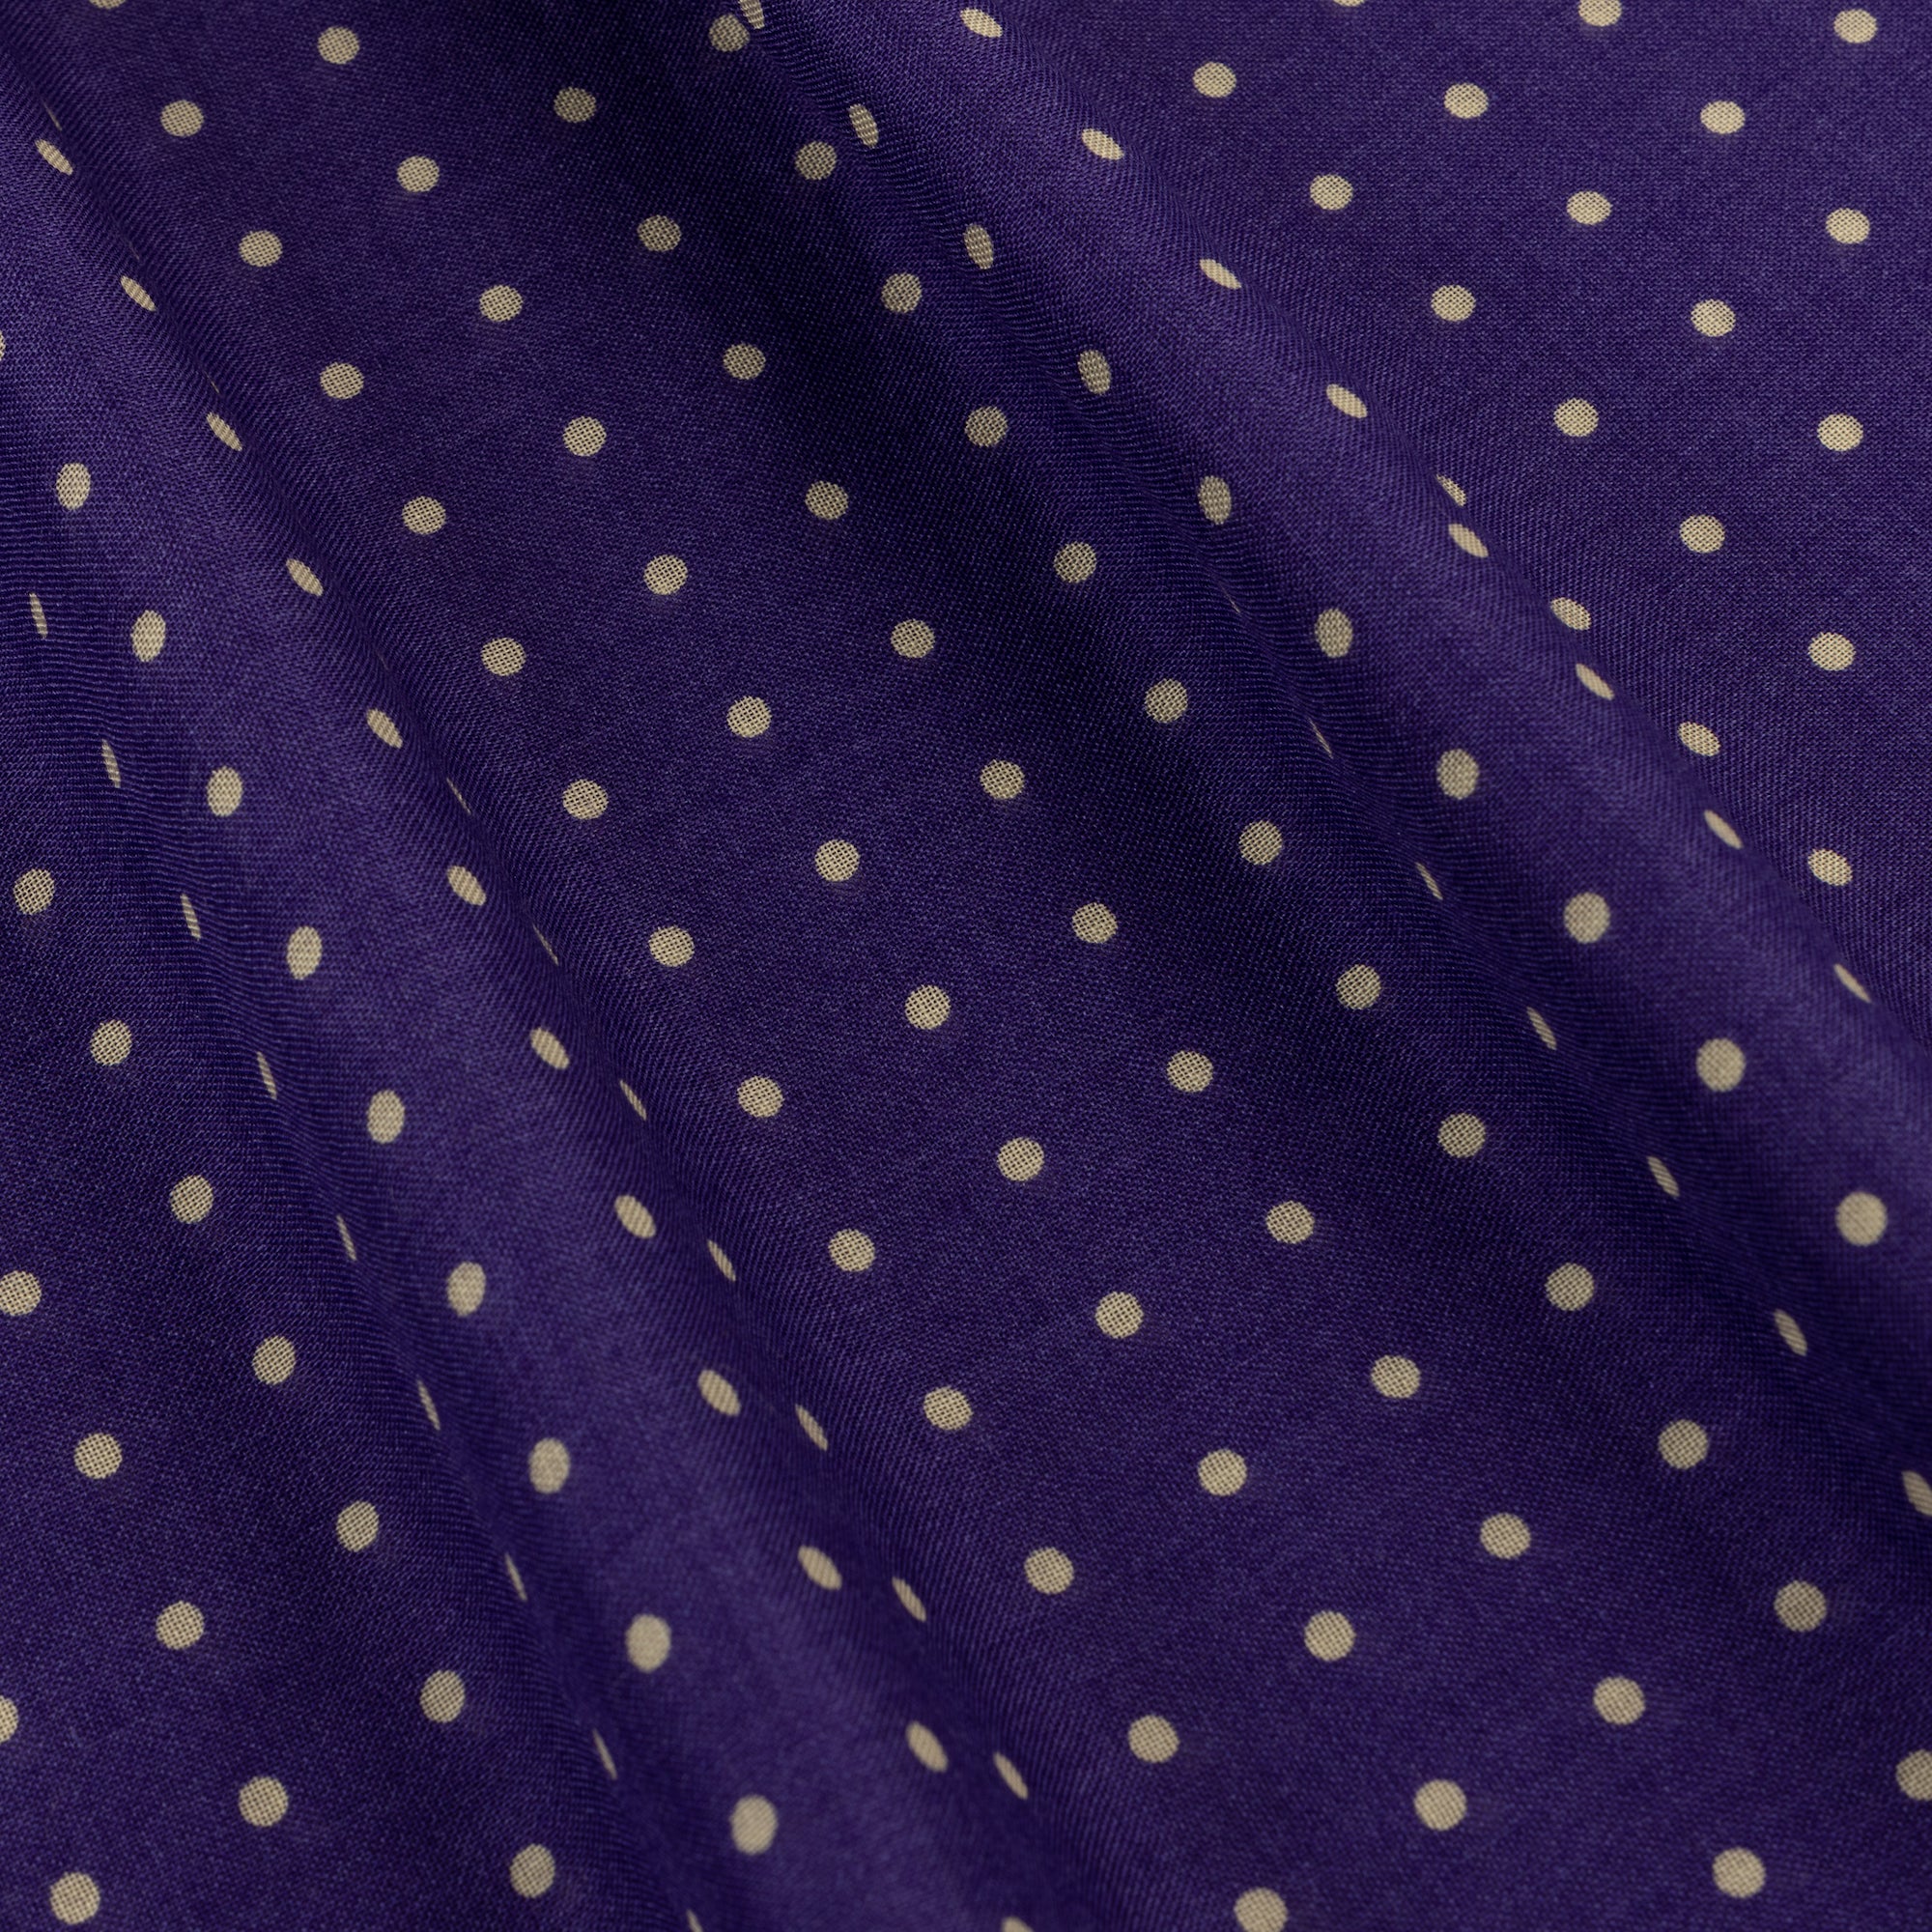 Purple Spotted Print Scarf